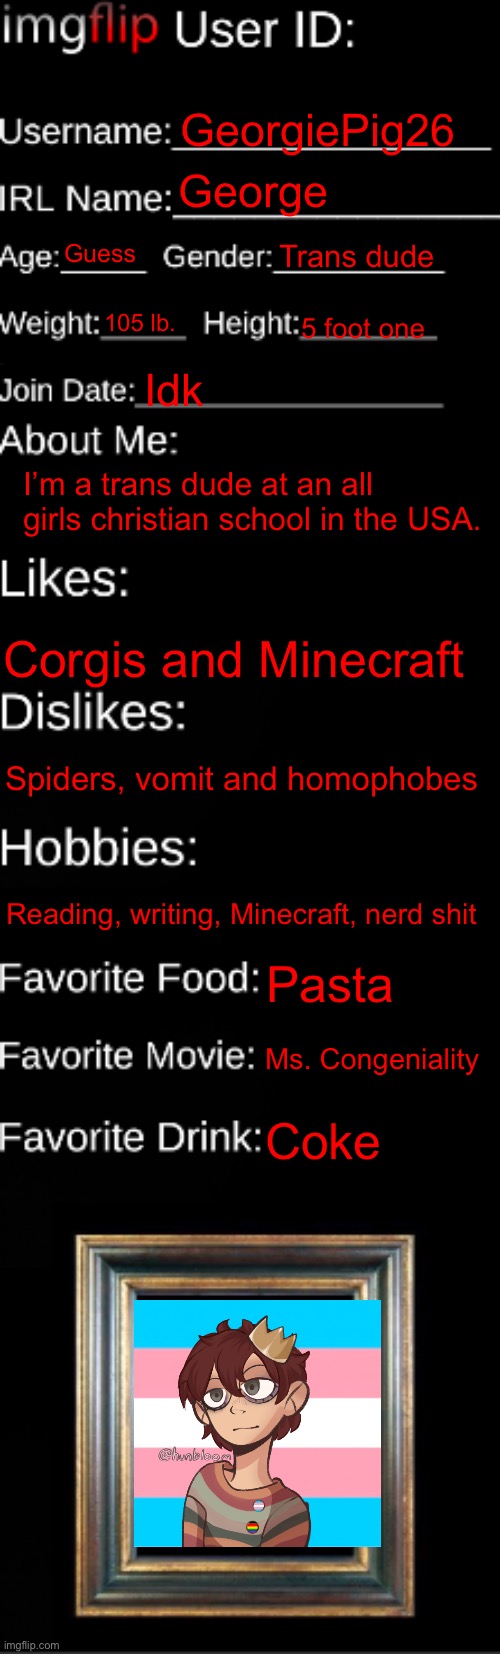 imgflip ID Card | GeorgiePig26; George; Guess; Trans dude; 105 lb. 5 foot one; Idk; I’m a trans dude at an all girls christian school in the USA. Corgis and Minecraft; Spiders, vomit and homophobes; Reading, writing, Minecraft, nerd shit; Pasta; Ms. Congeniality; Coke | image tagged in imgflip id card | made w/ Imgflip meme maker